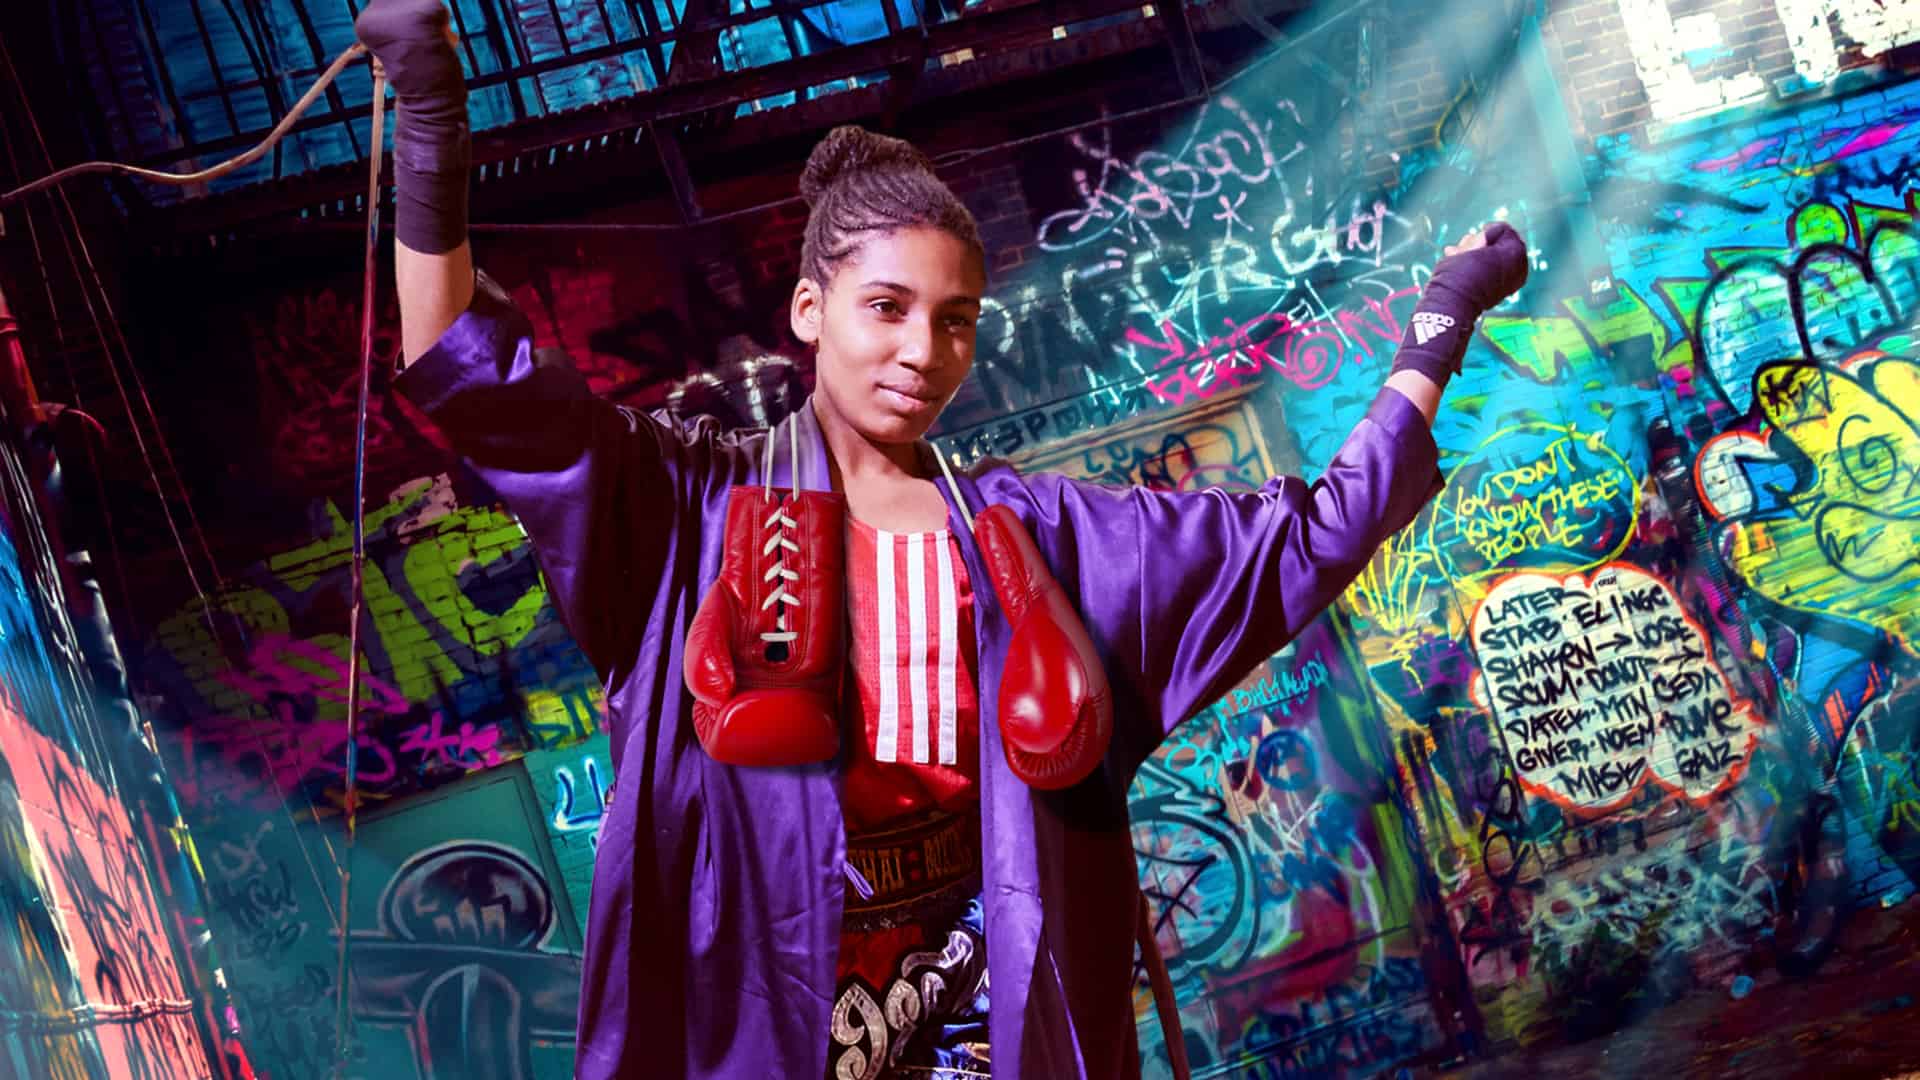 'Fight like a girl' focuses around the stories of females in boxing. Photo provided by British Youth Musical Theater.